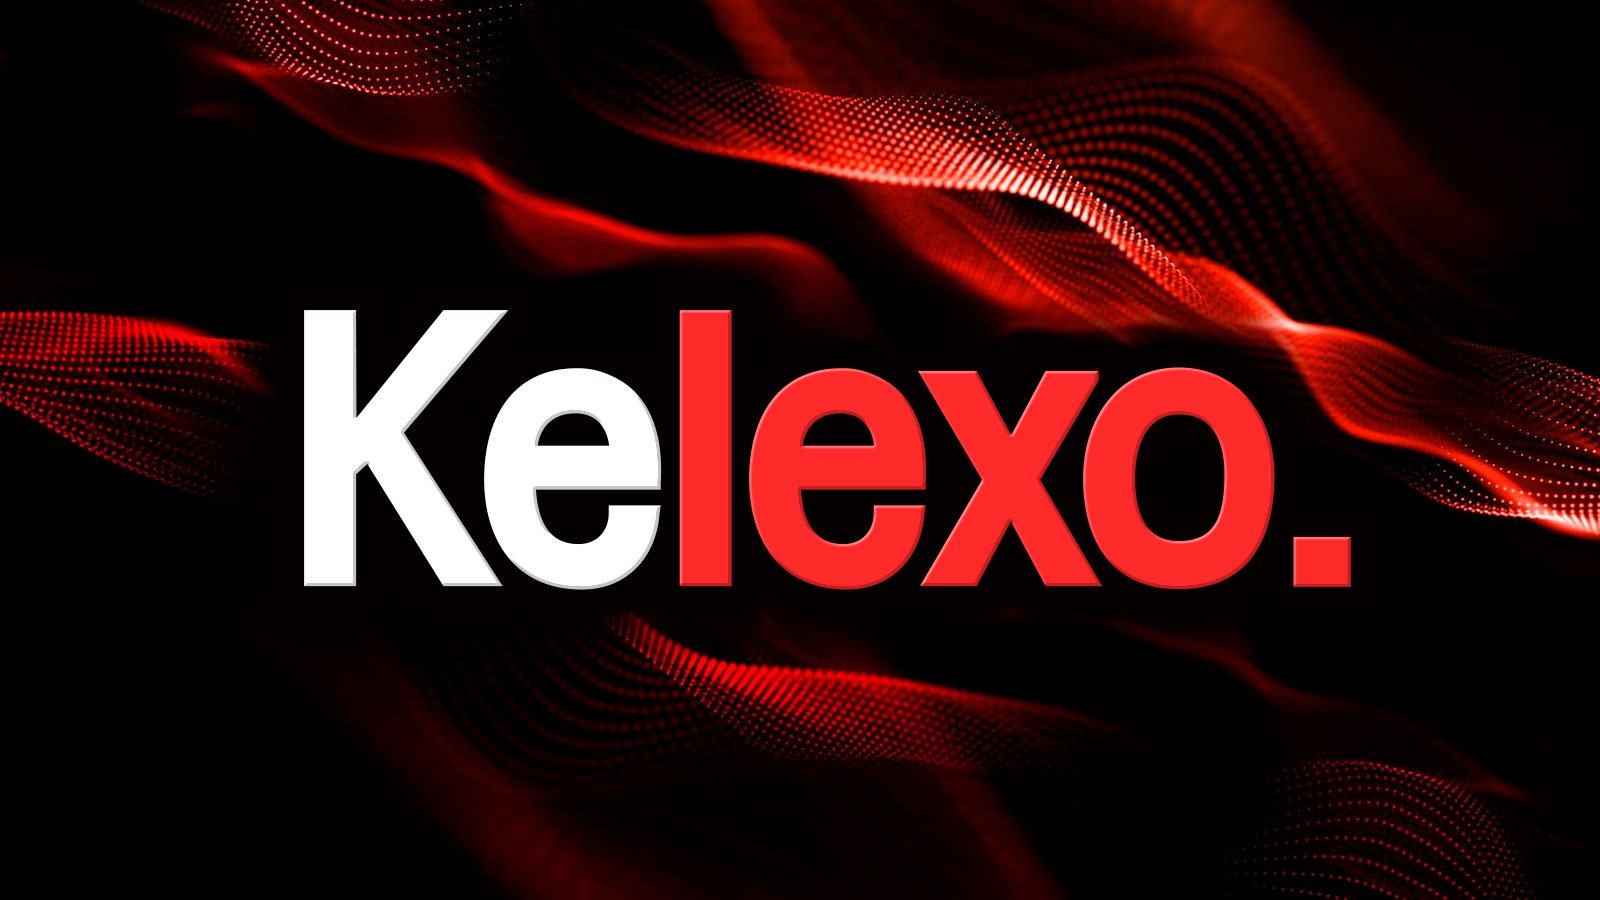 Kelexo (KLXO) Pre-Sale In Focus for Crypto Fans in January as Avalanche (AVAX) and Tron (TRX) Altcoins Recovering